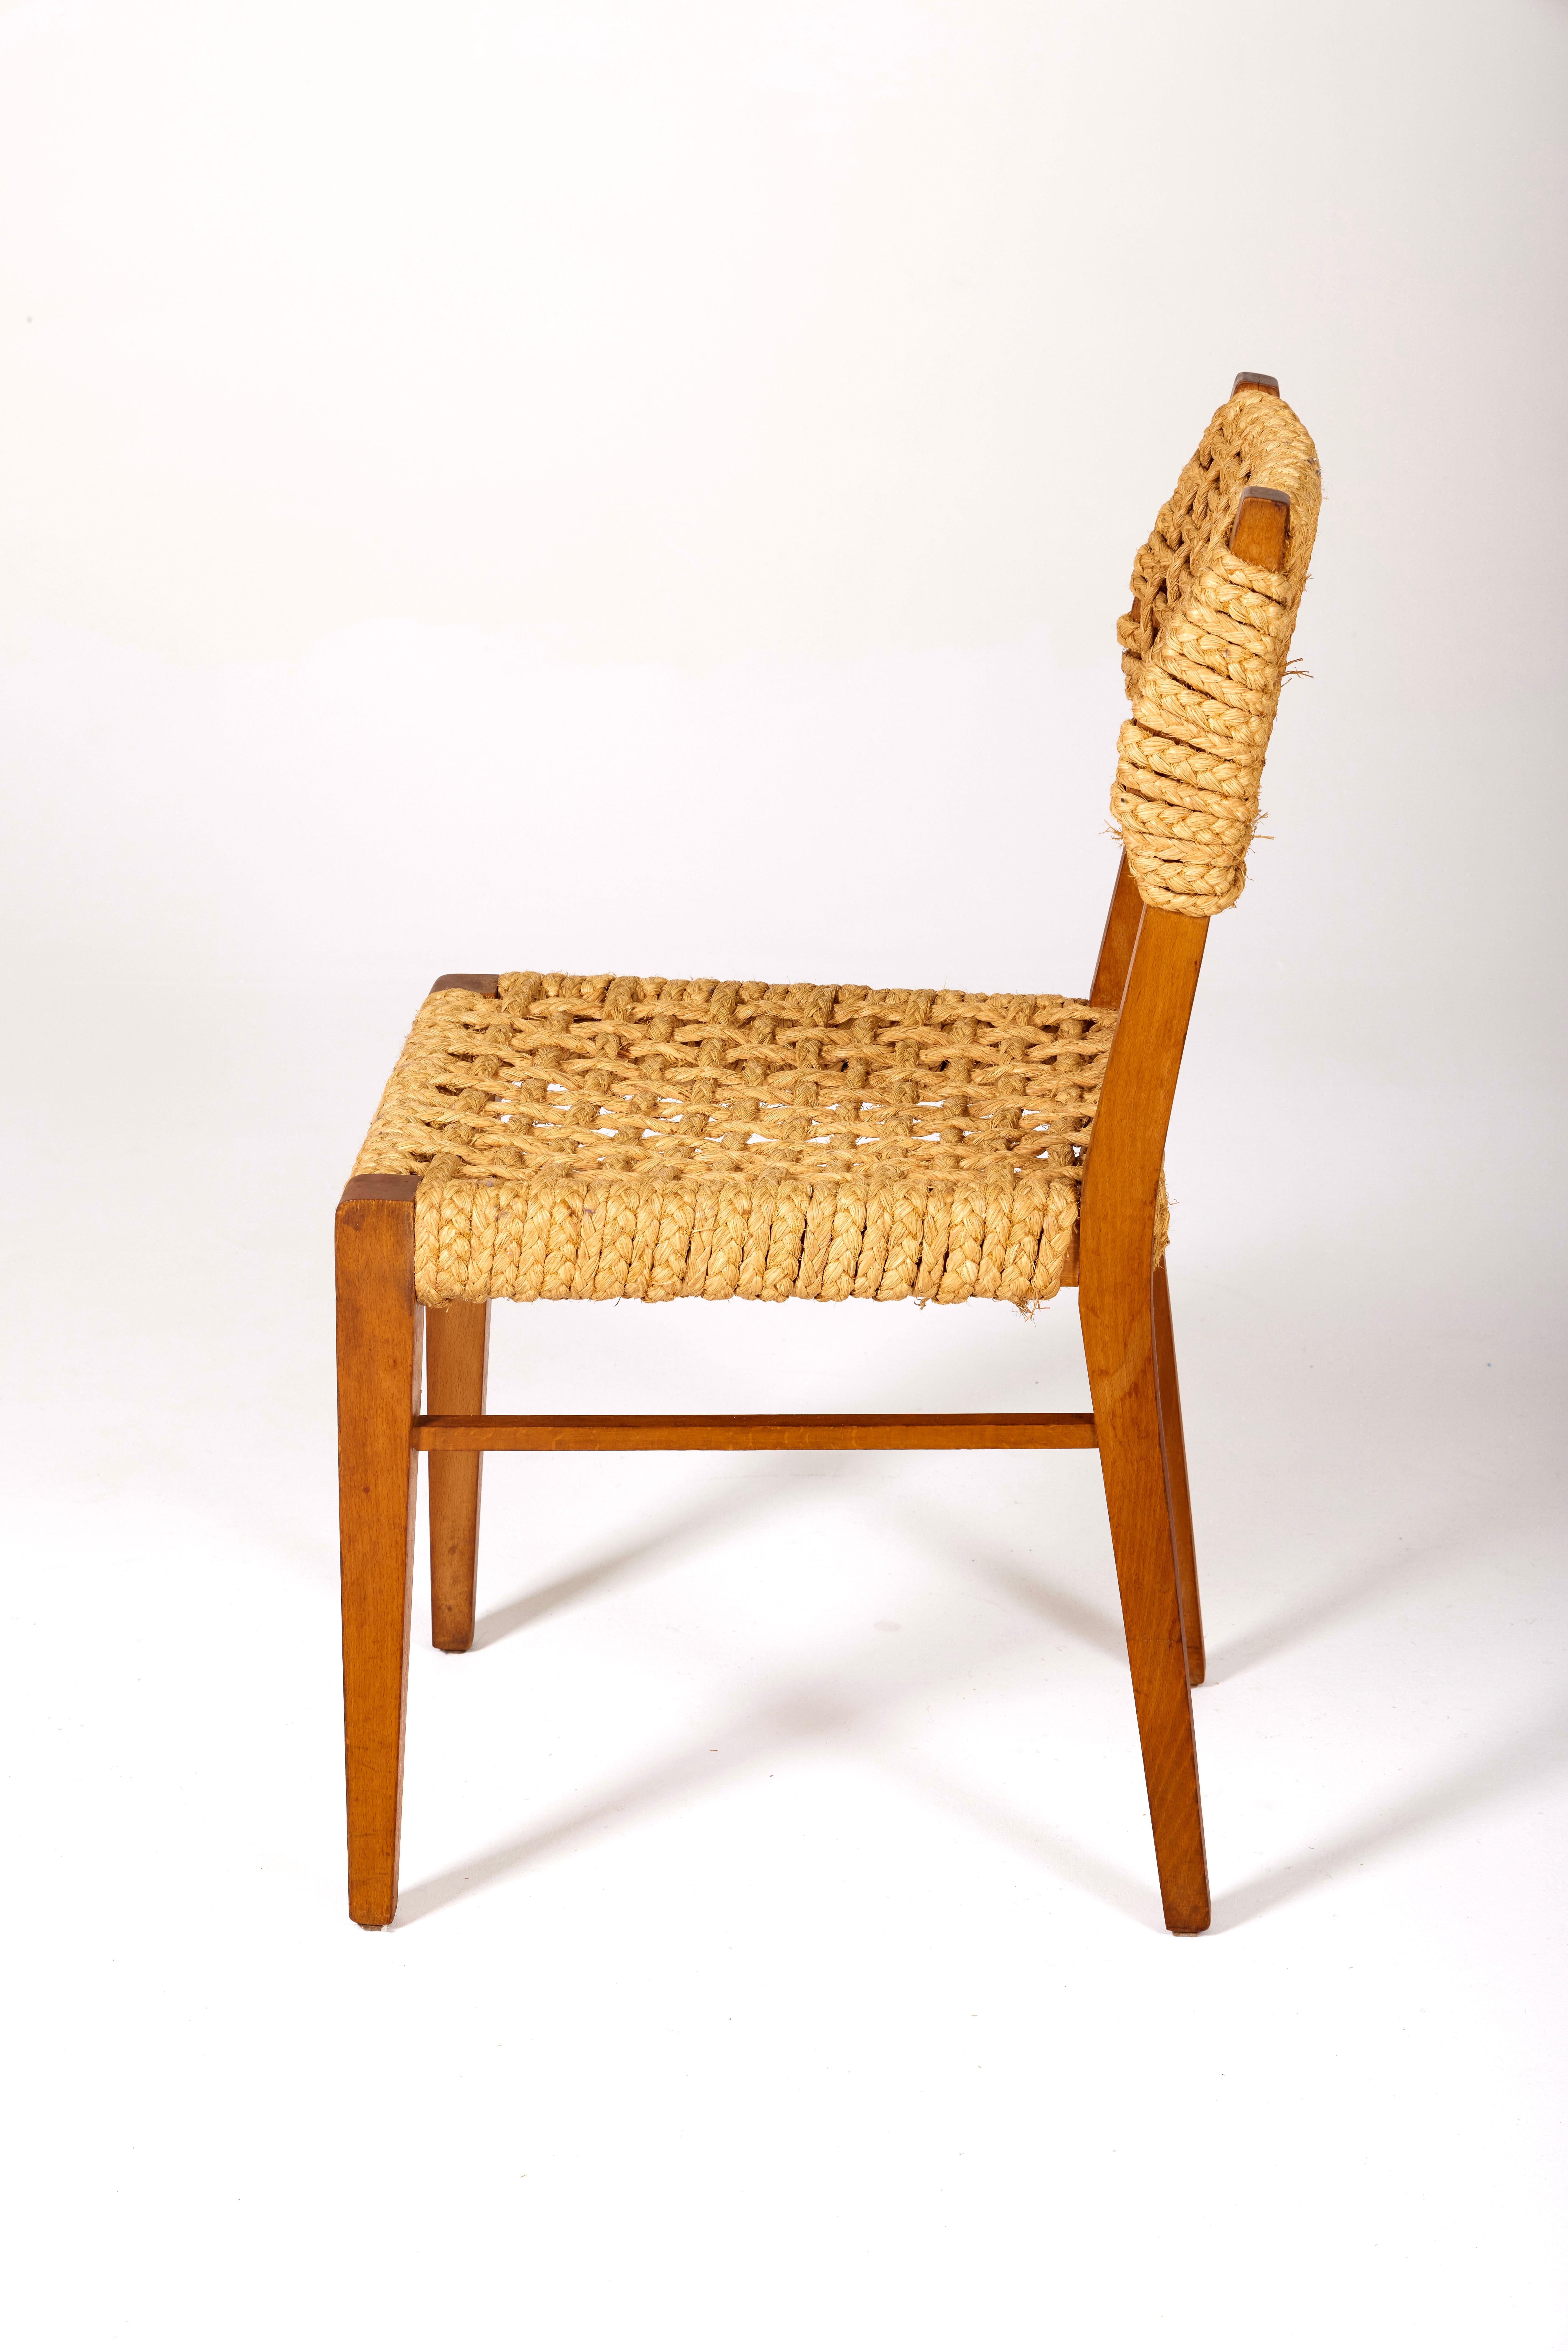 20th Century Wood and rope chair by Audoux & Minet